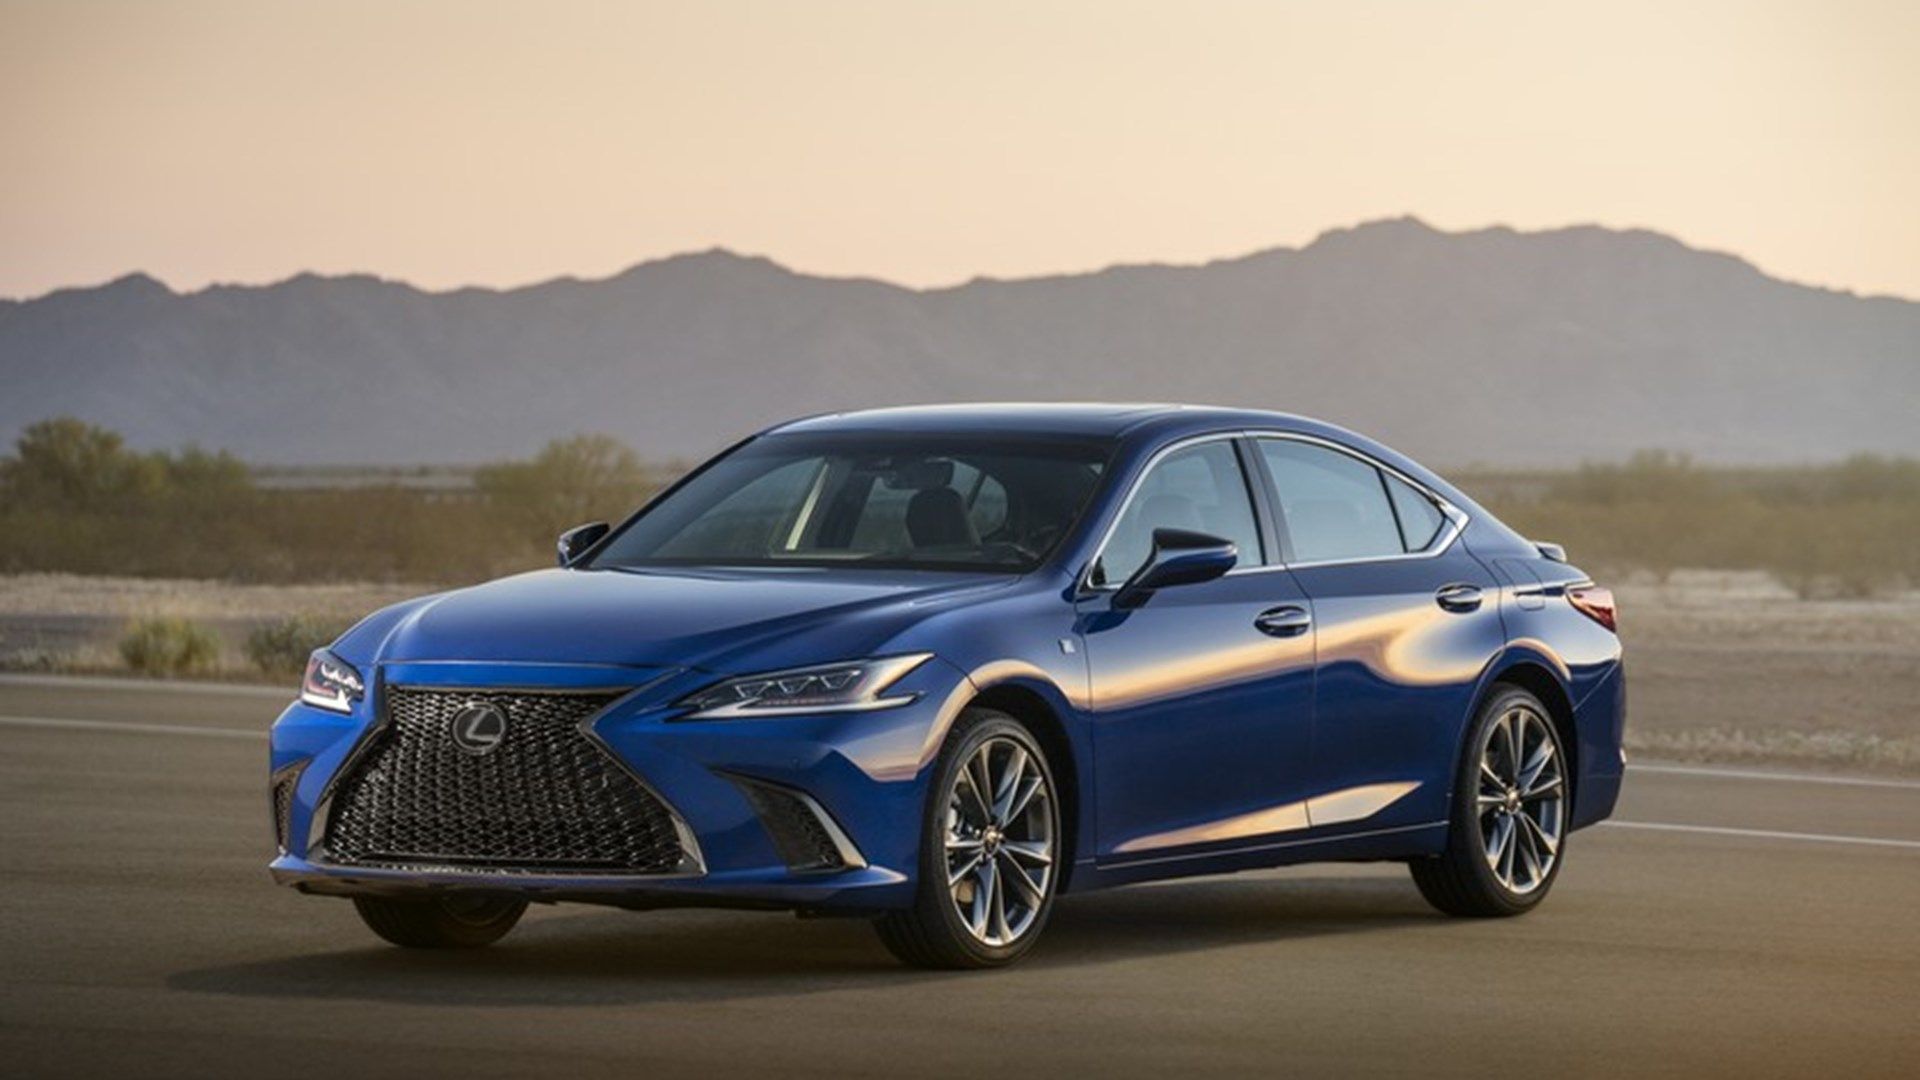 Lexus ES Lineup Gets New 4 Cylinder Engine Model With AWD